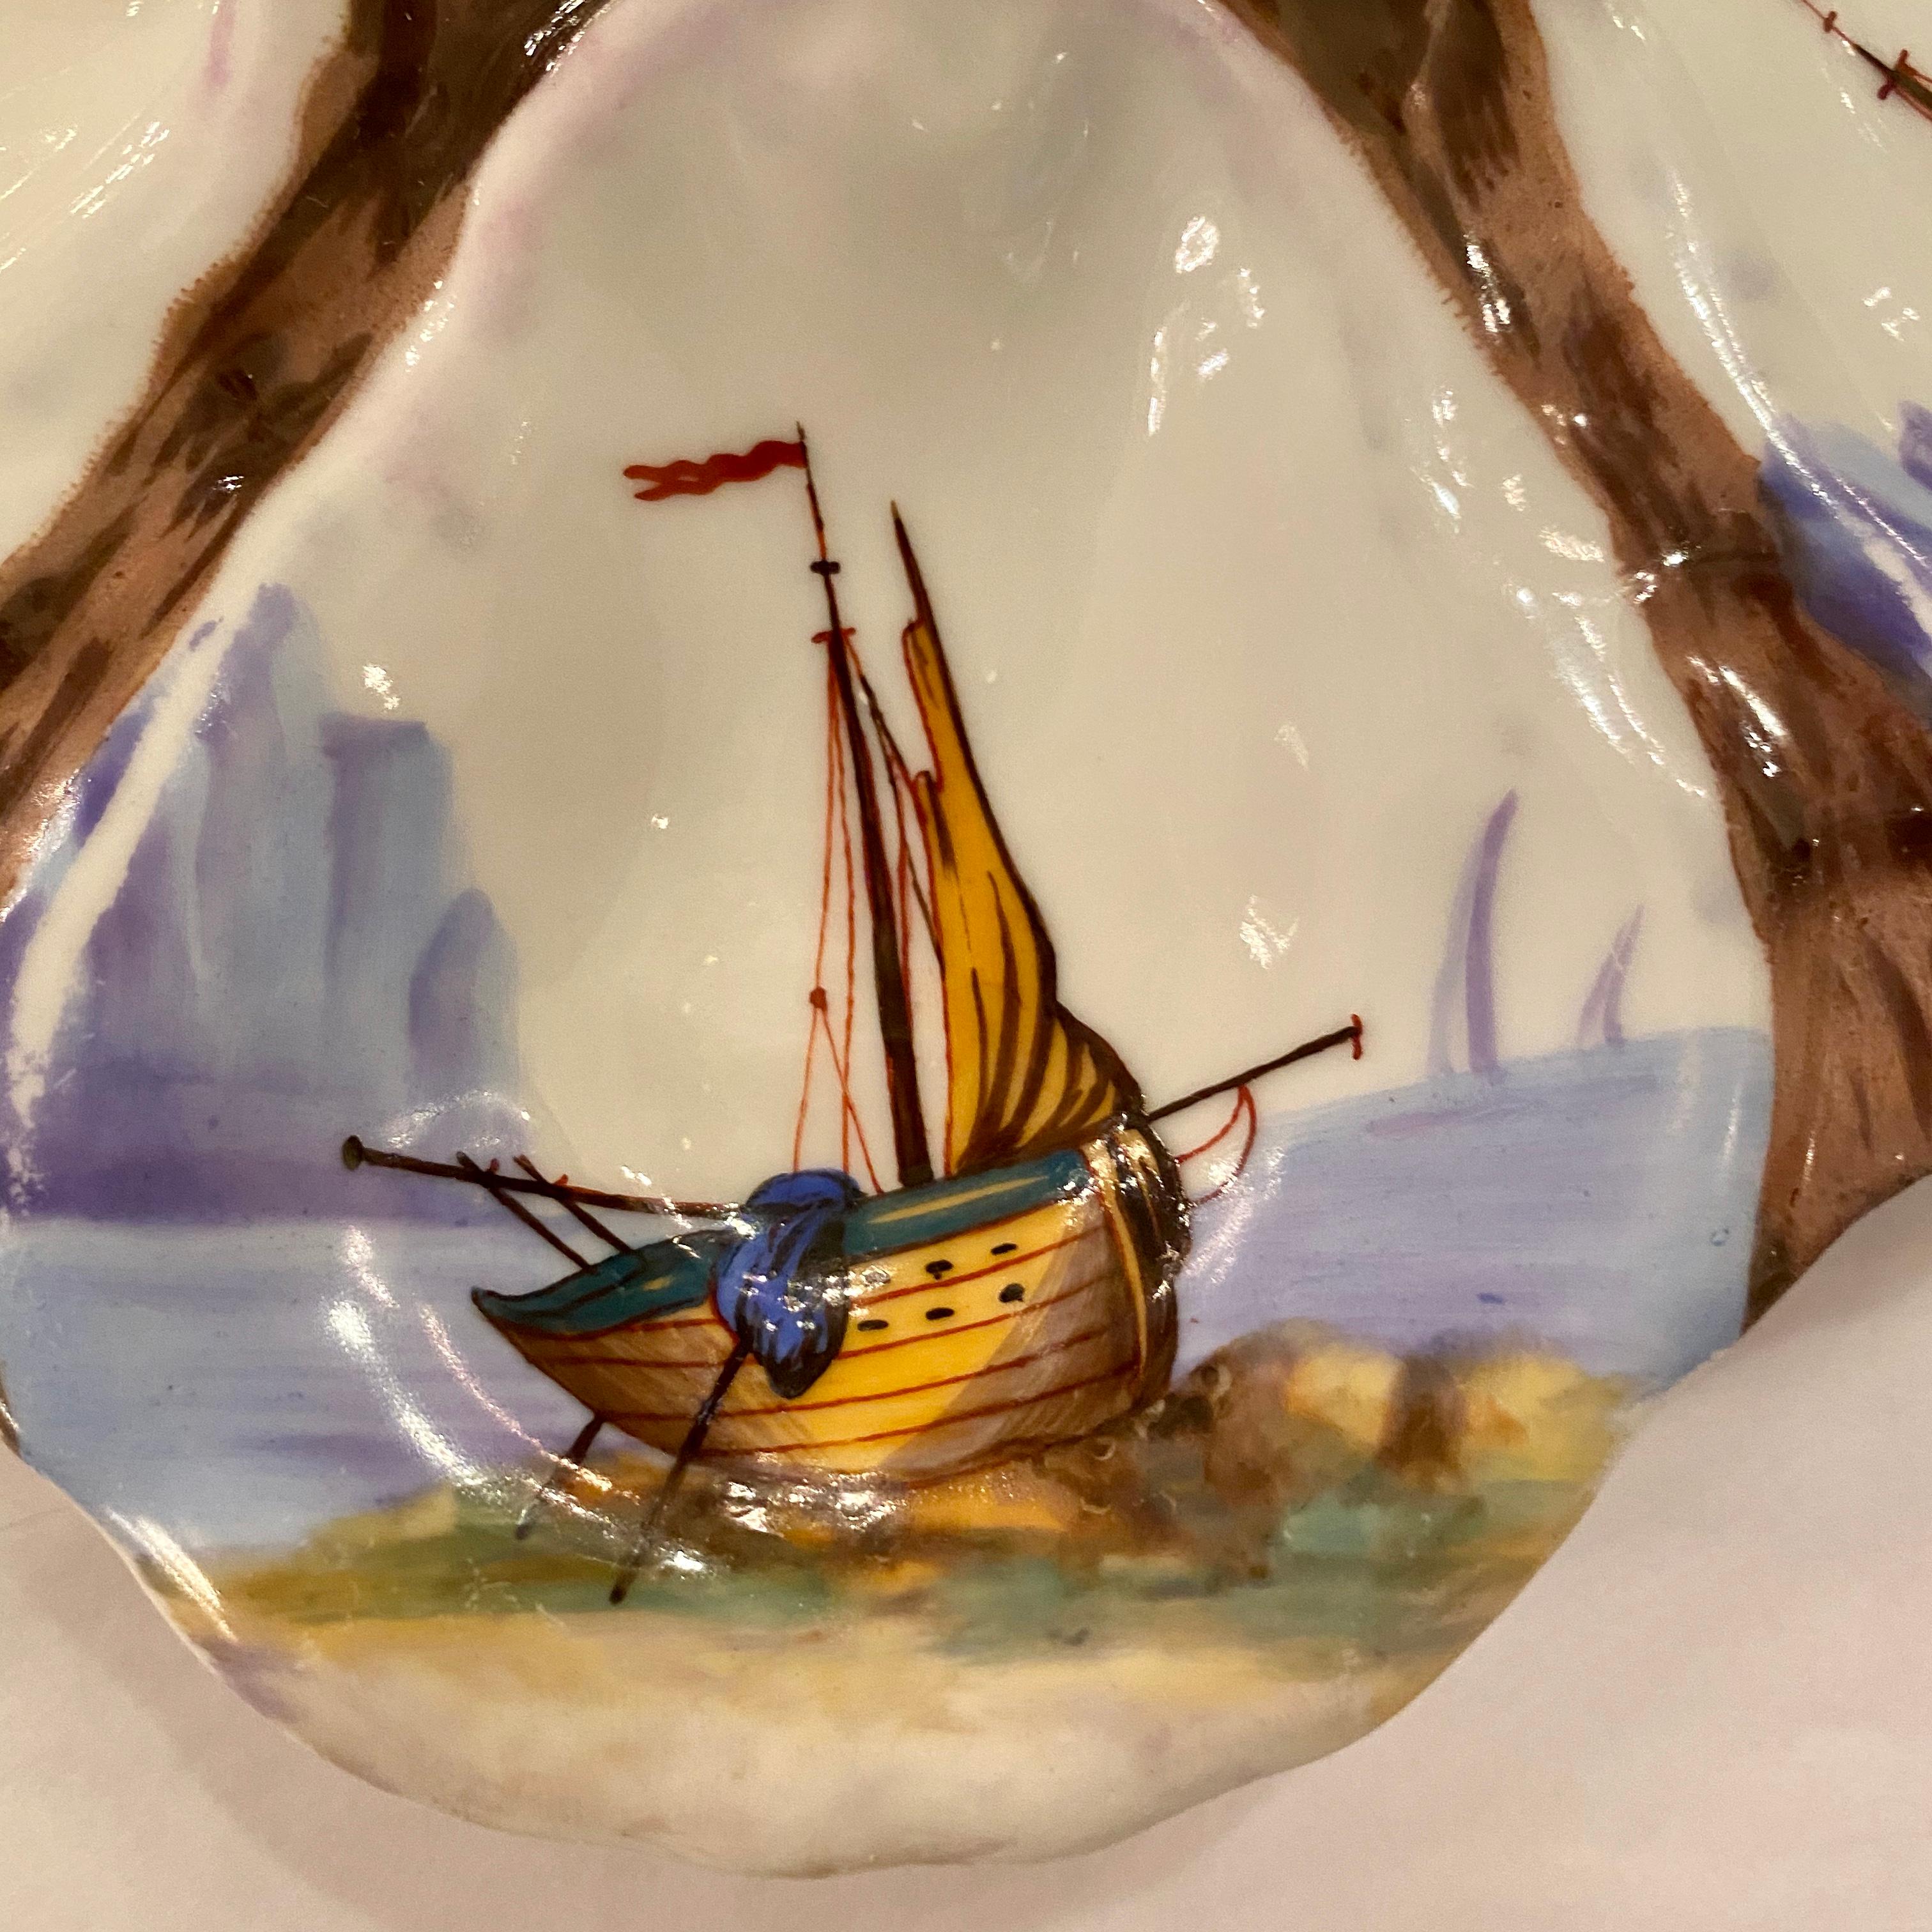 Antique French Limoges Porcelain oyster plate with hand painted sailboat scenes, circa 1880s.